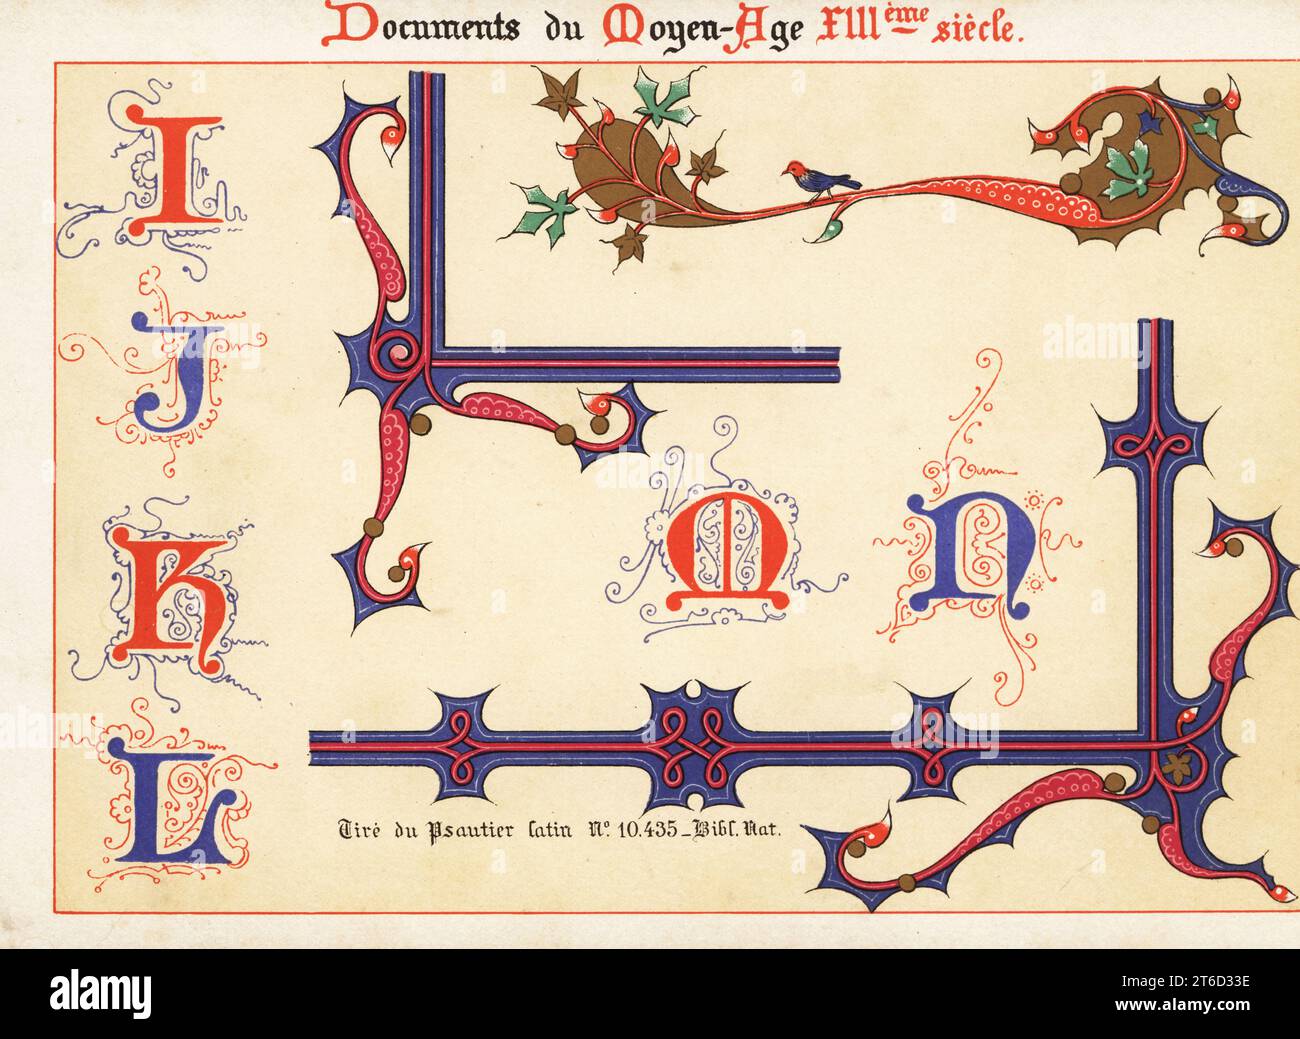 Alphabet of decorative initial letters from I to N, with filigree and foliage, from a 13th century illuminated Latin psalter in the Bibliotheque National, manuscript 10435. Tire du Psautier Latin No. 10.435, Bib. Nat. Chromolithograph designed and lithographed by Ernst Guillot from his Ornementation des Manuscrits au Moyen-Age (Ornamentation from Manuscripts of the Middle Ages), Paris, 1897. Stock Photo